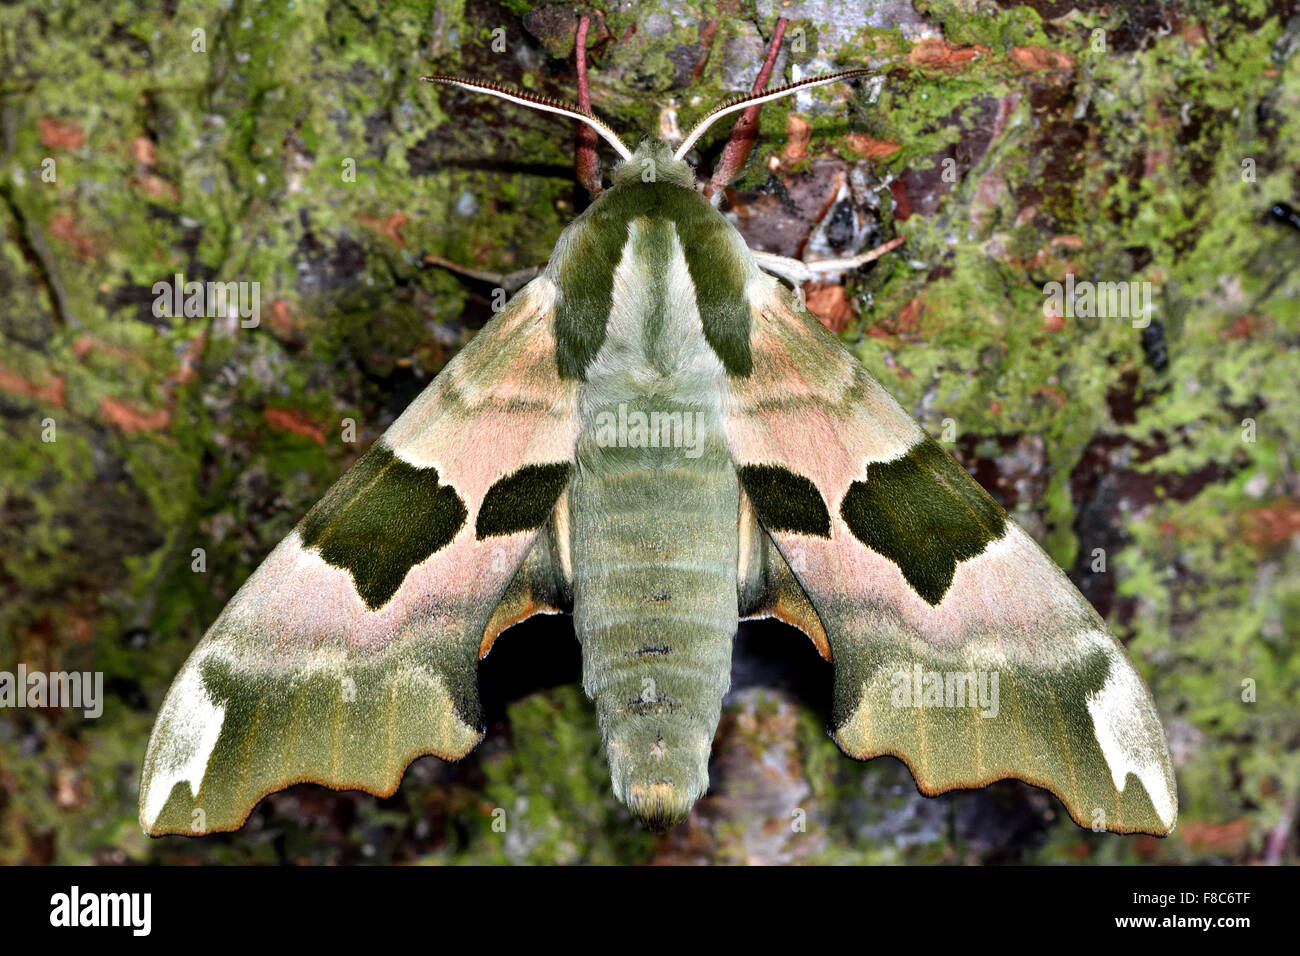 Lime hawk-moth (Mimas tiliae) at rest on lichen and algae covered bark Stock Photo